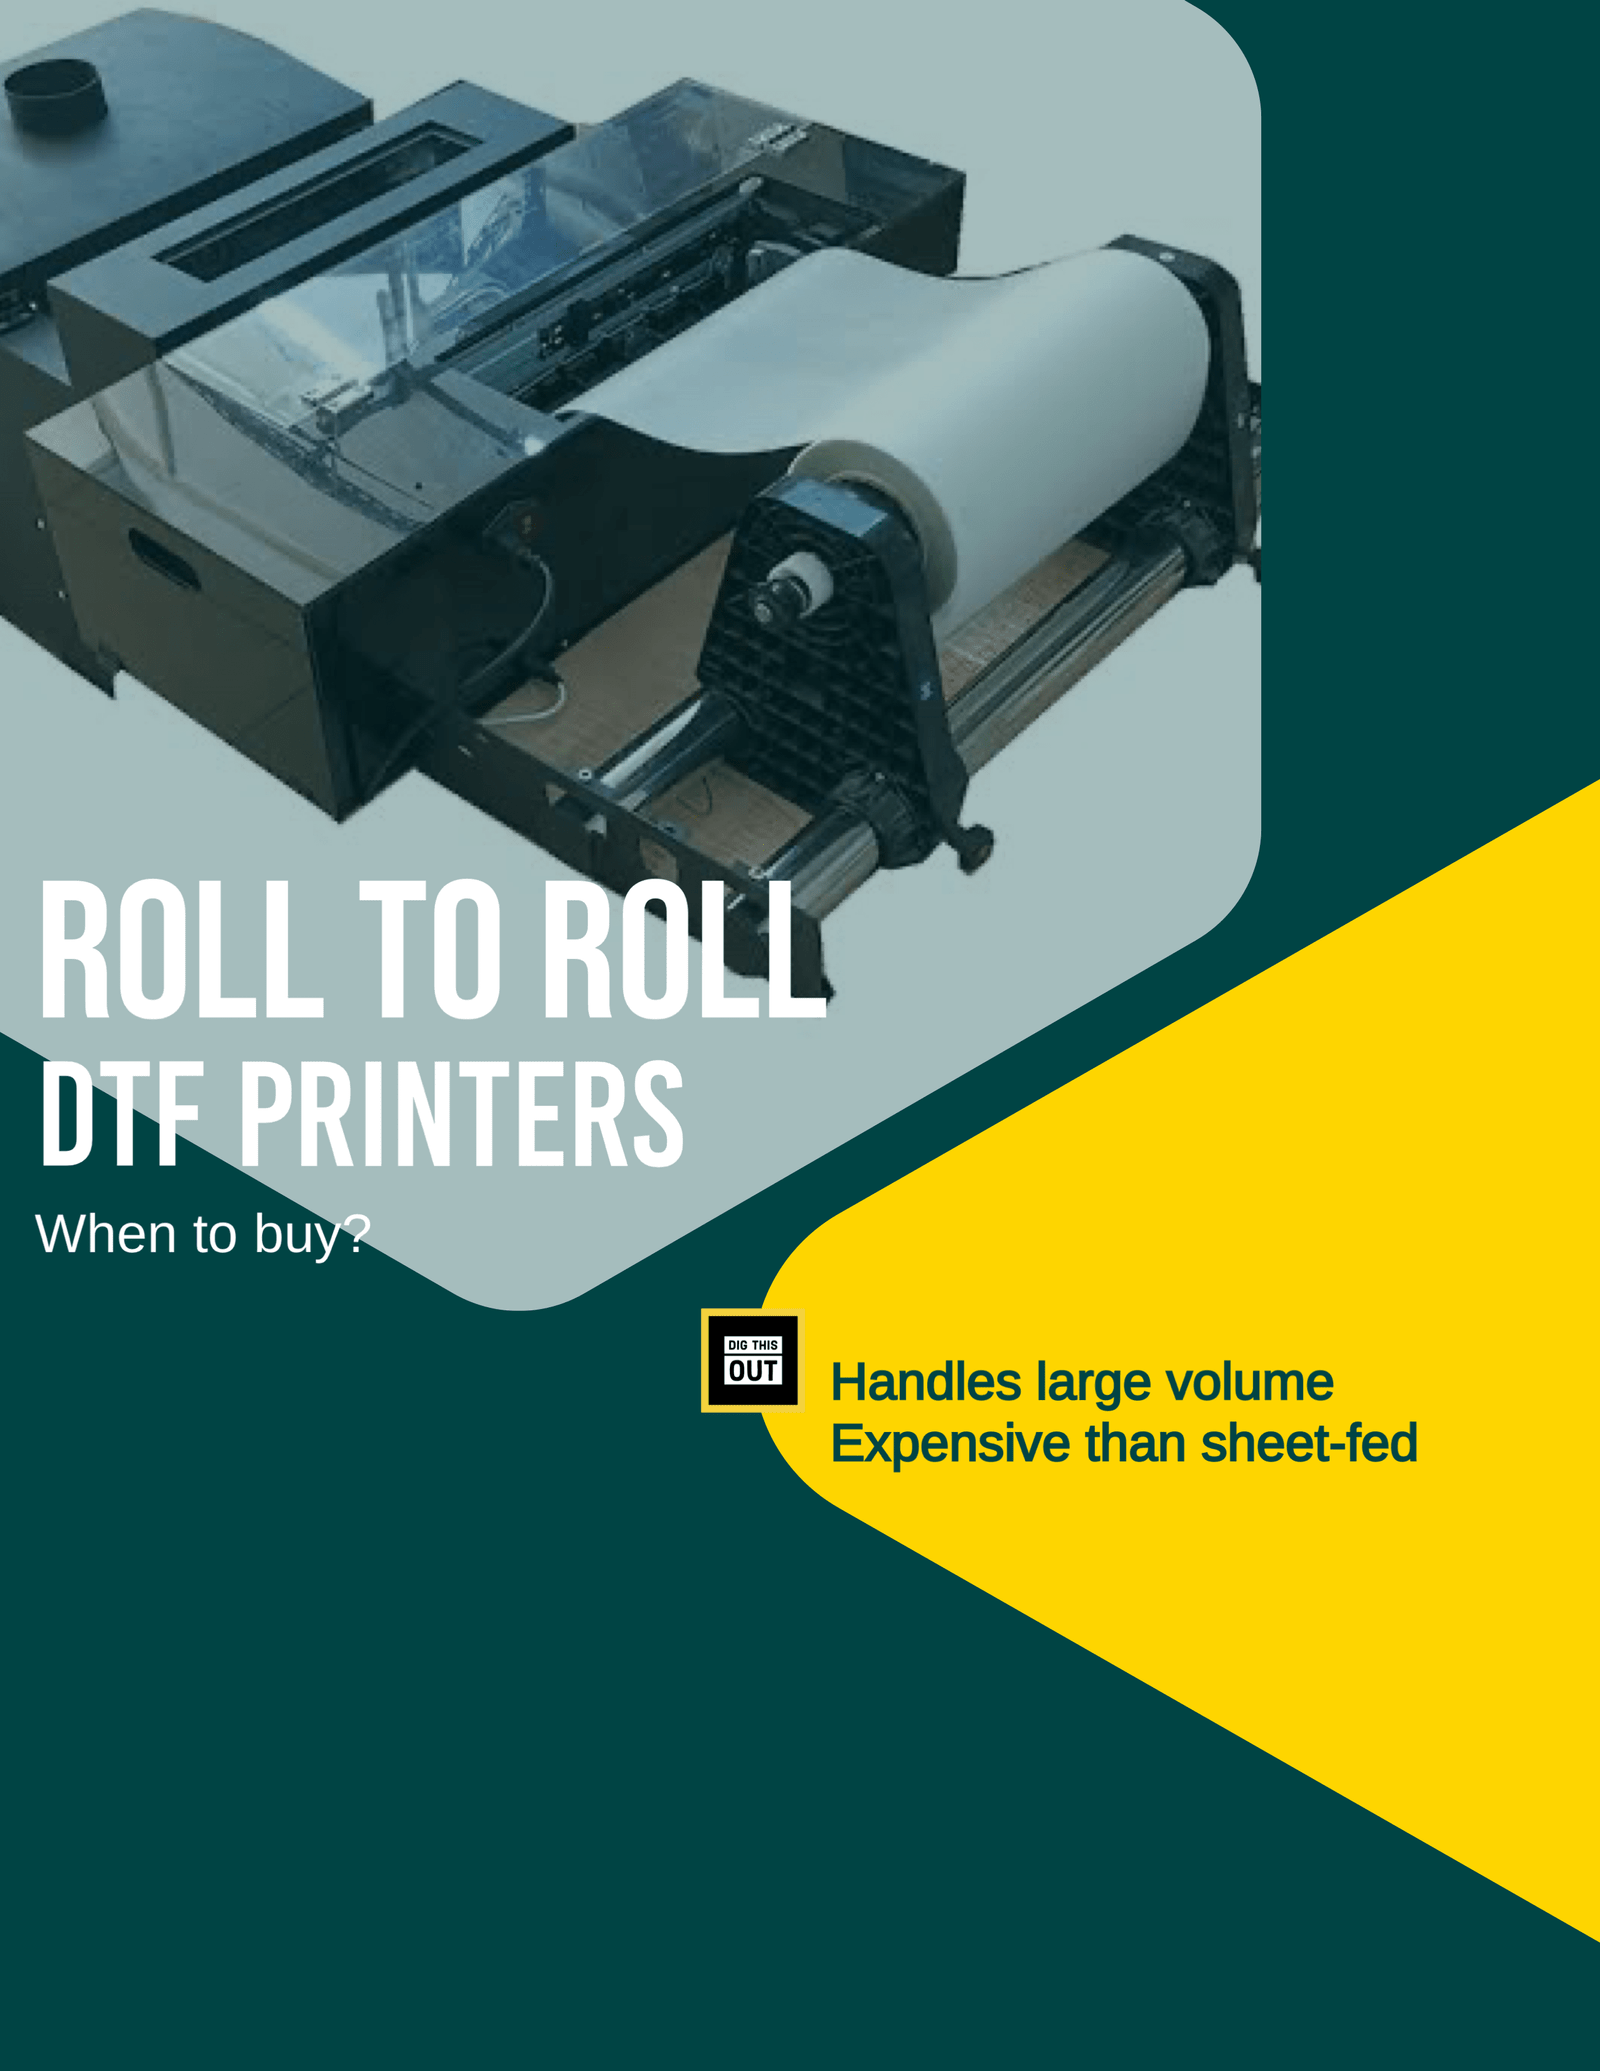 Roll to roll dtf printer